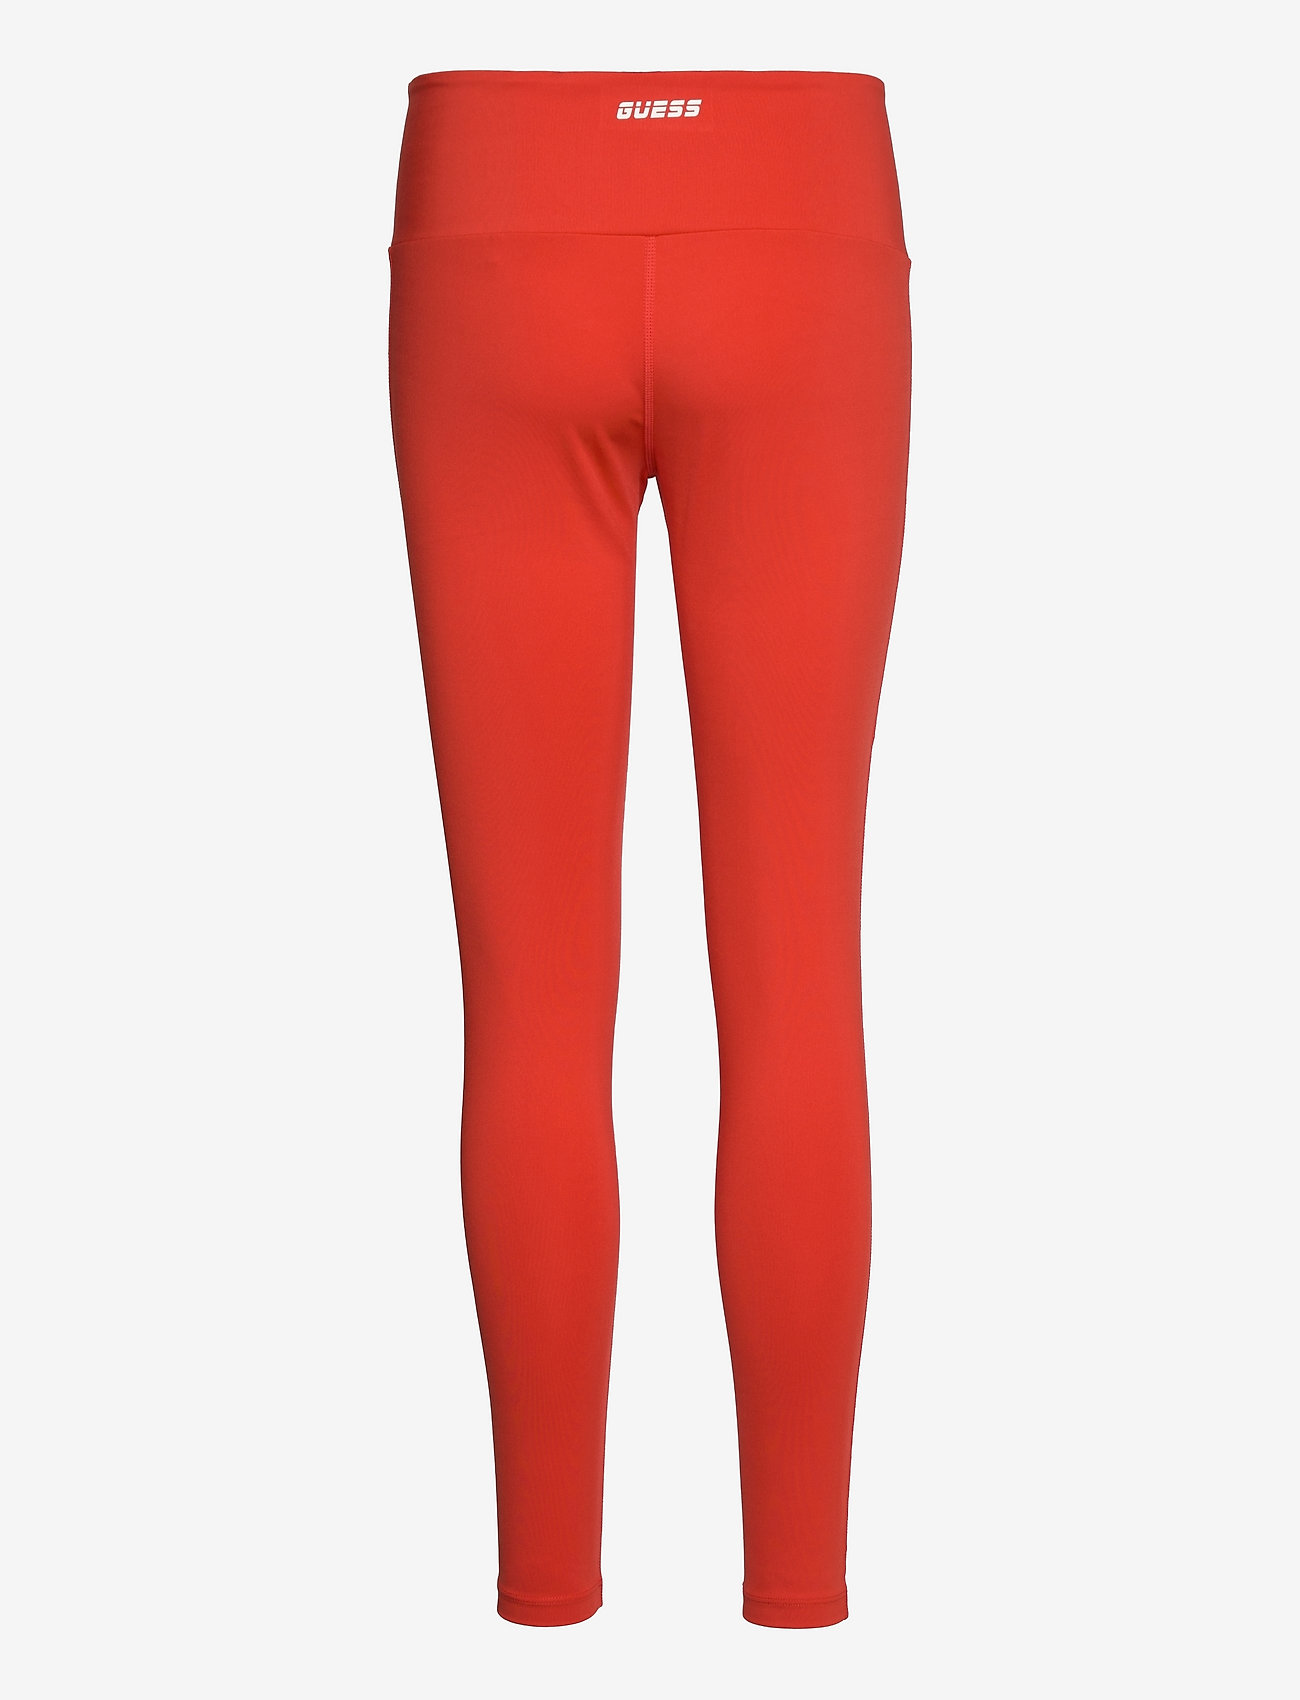 Guess Activewear - AGATHA LEGGINGS 4/4 - løpe-& treningstights - ardent red - 1